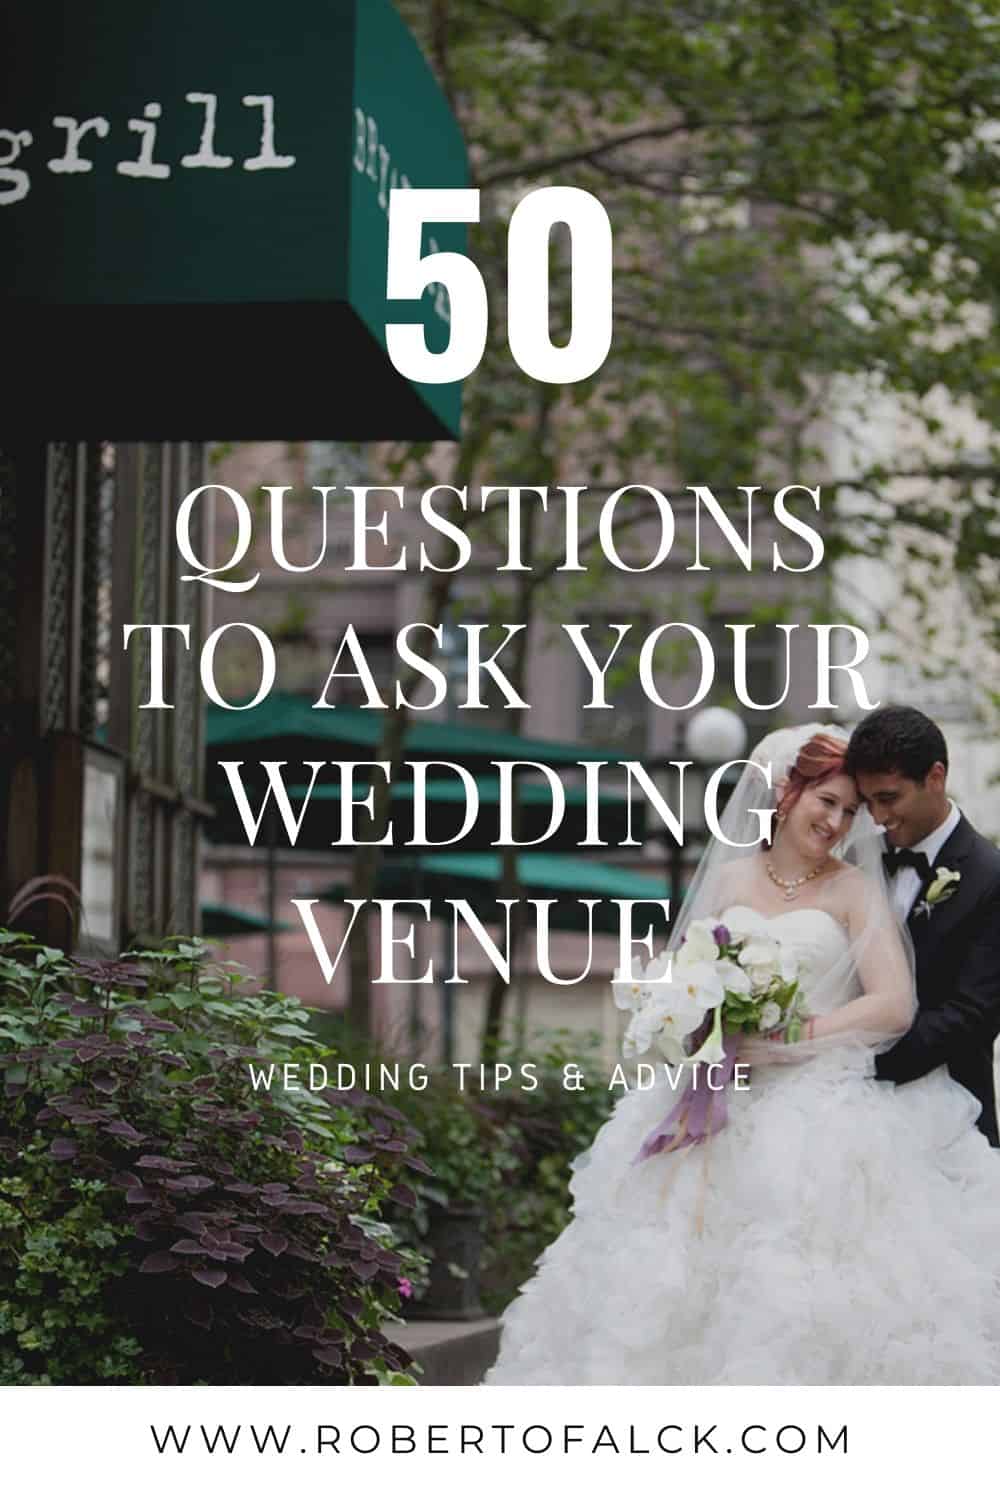 50 Questions to ask wedding venue